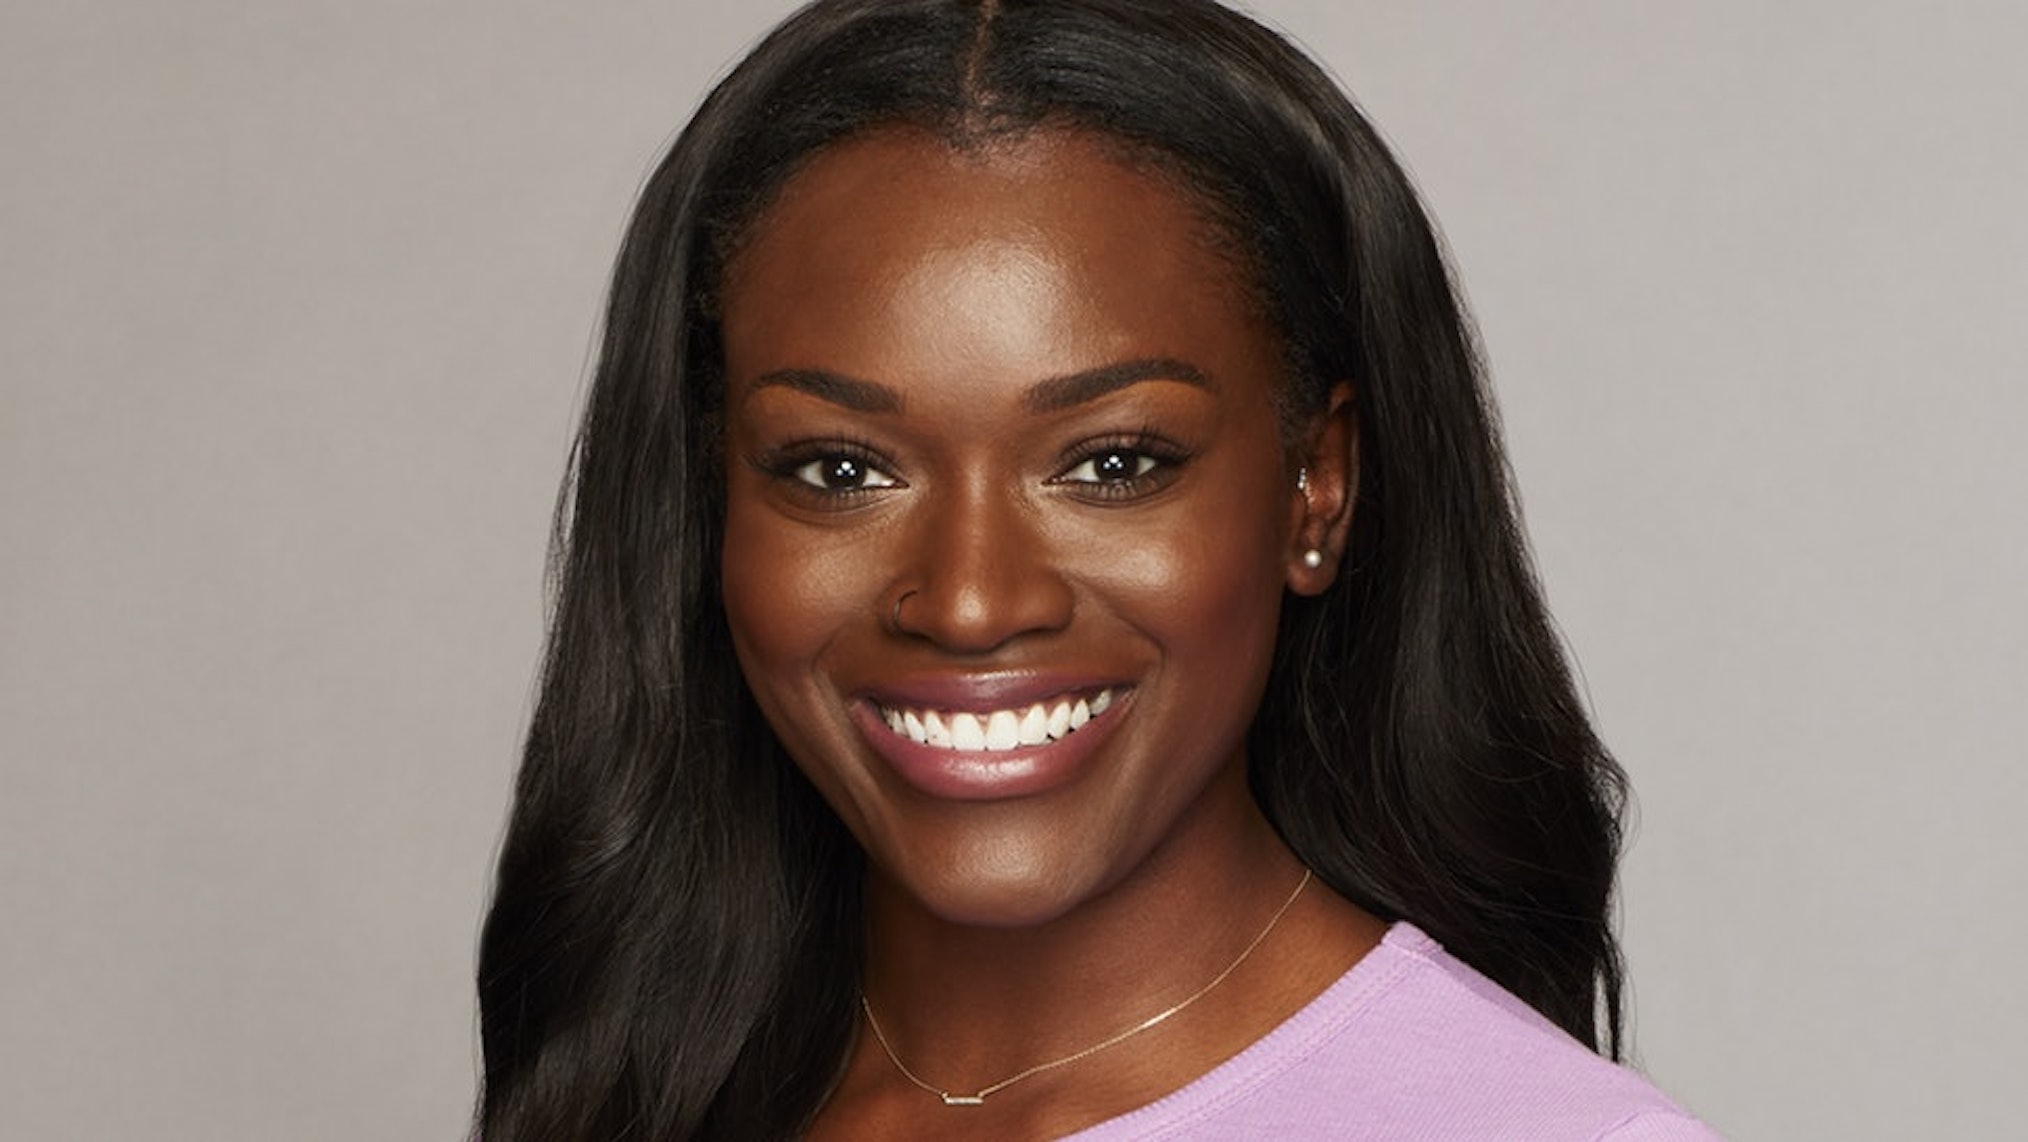 'The Bachelor' star Tahzjuan Hawkins wearing a pink shirt in a promotional photo